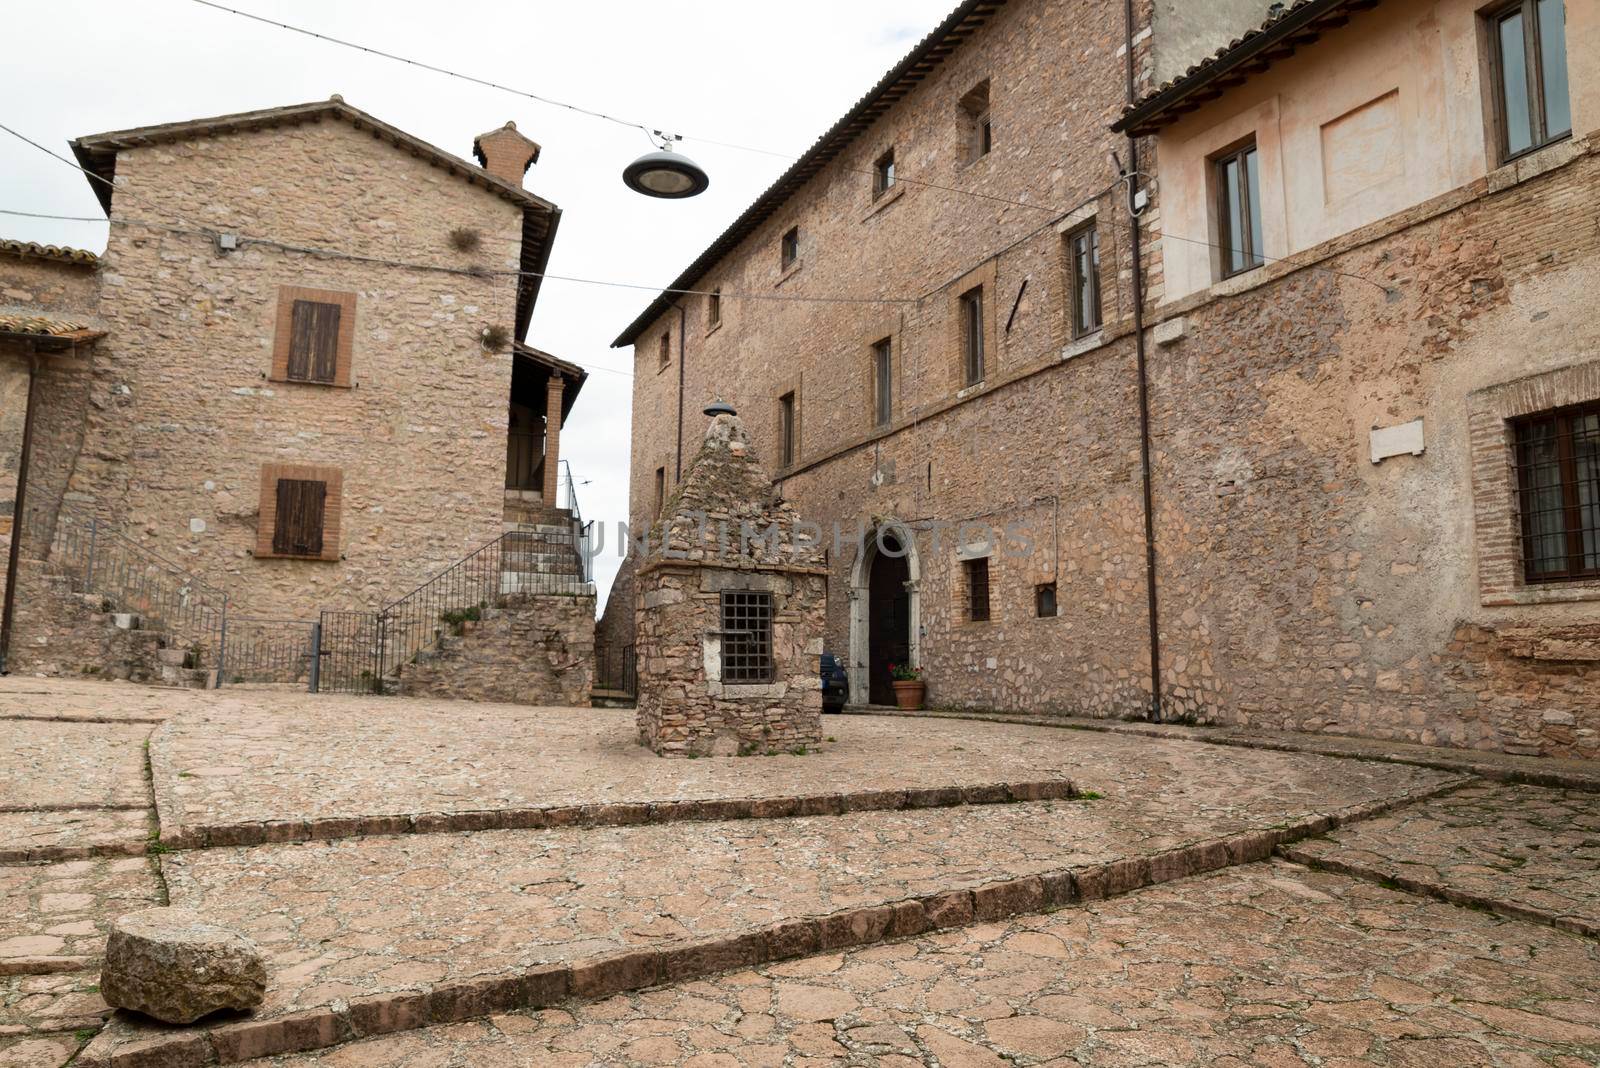 square with the well of Macerino, a historic town entirely made of stone, inhabited only in summer